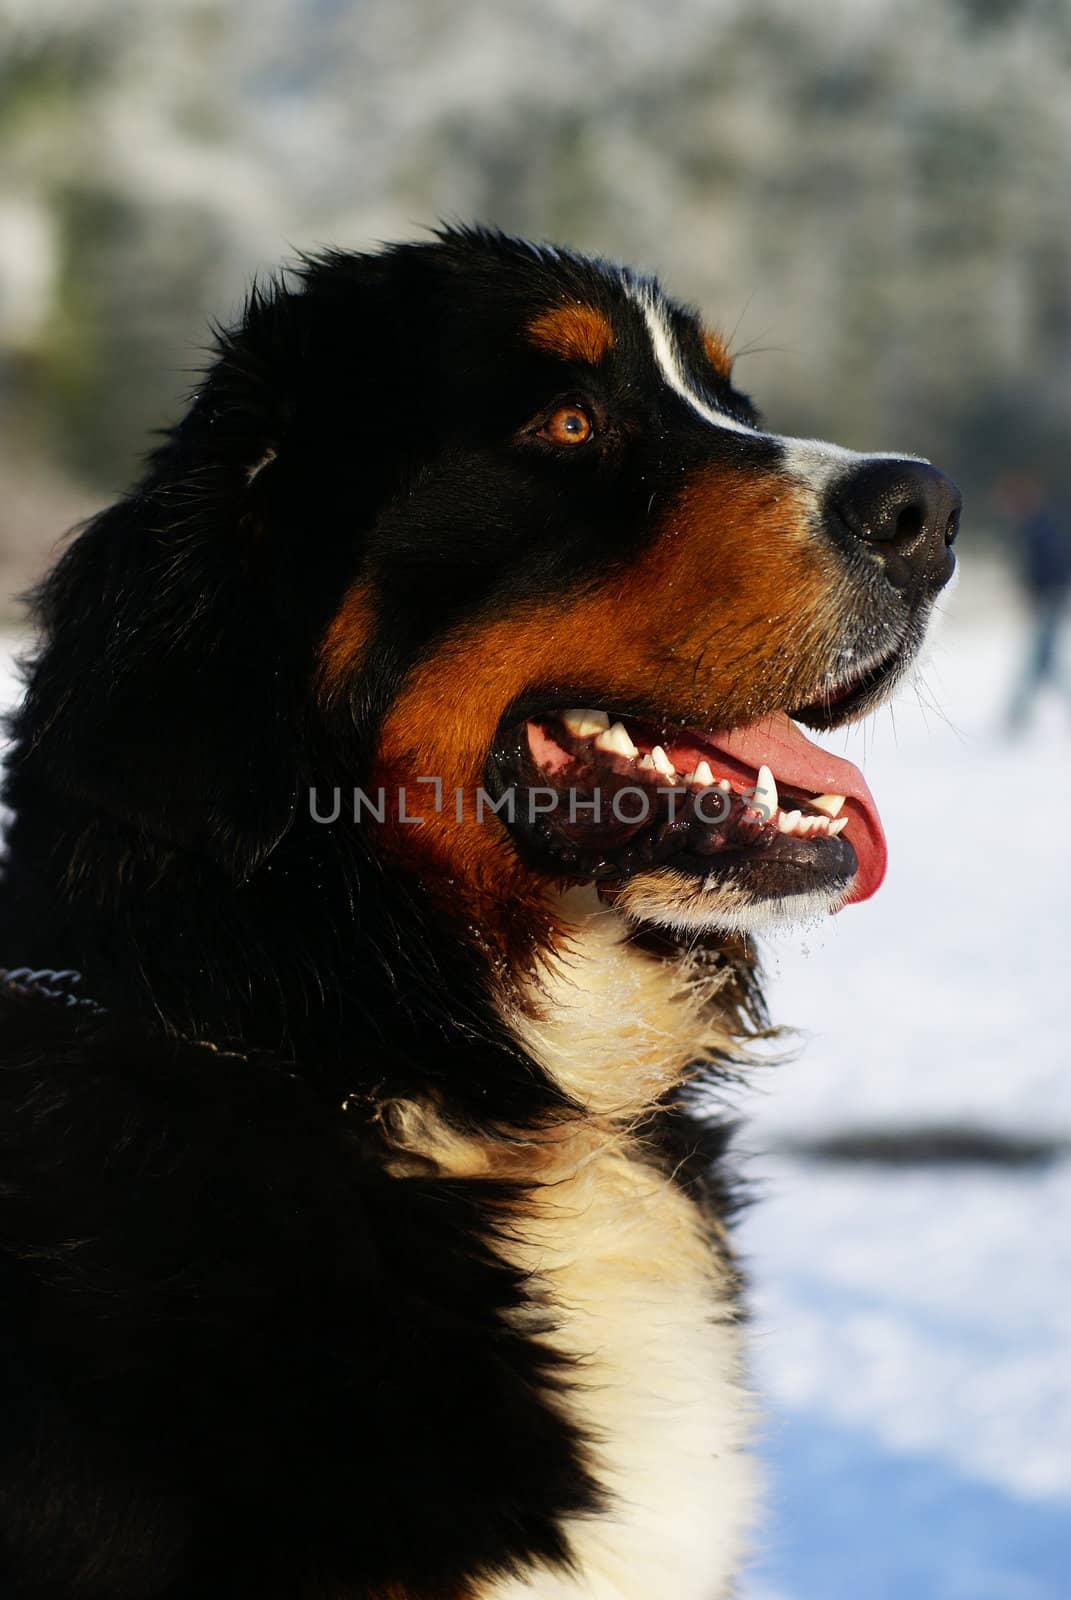 Portrait of a bernese mountain dog sitting outside in a snowy surrounding.